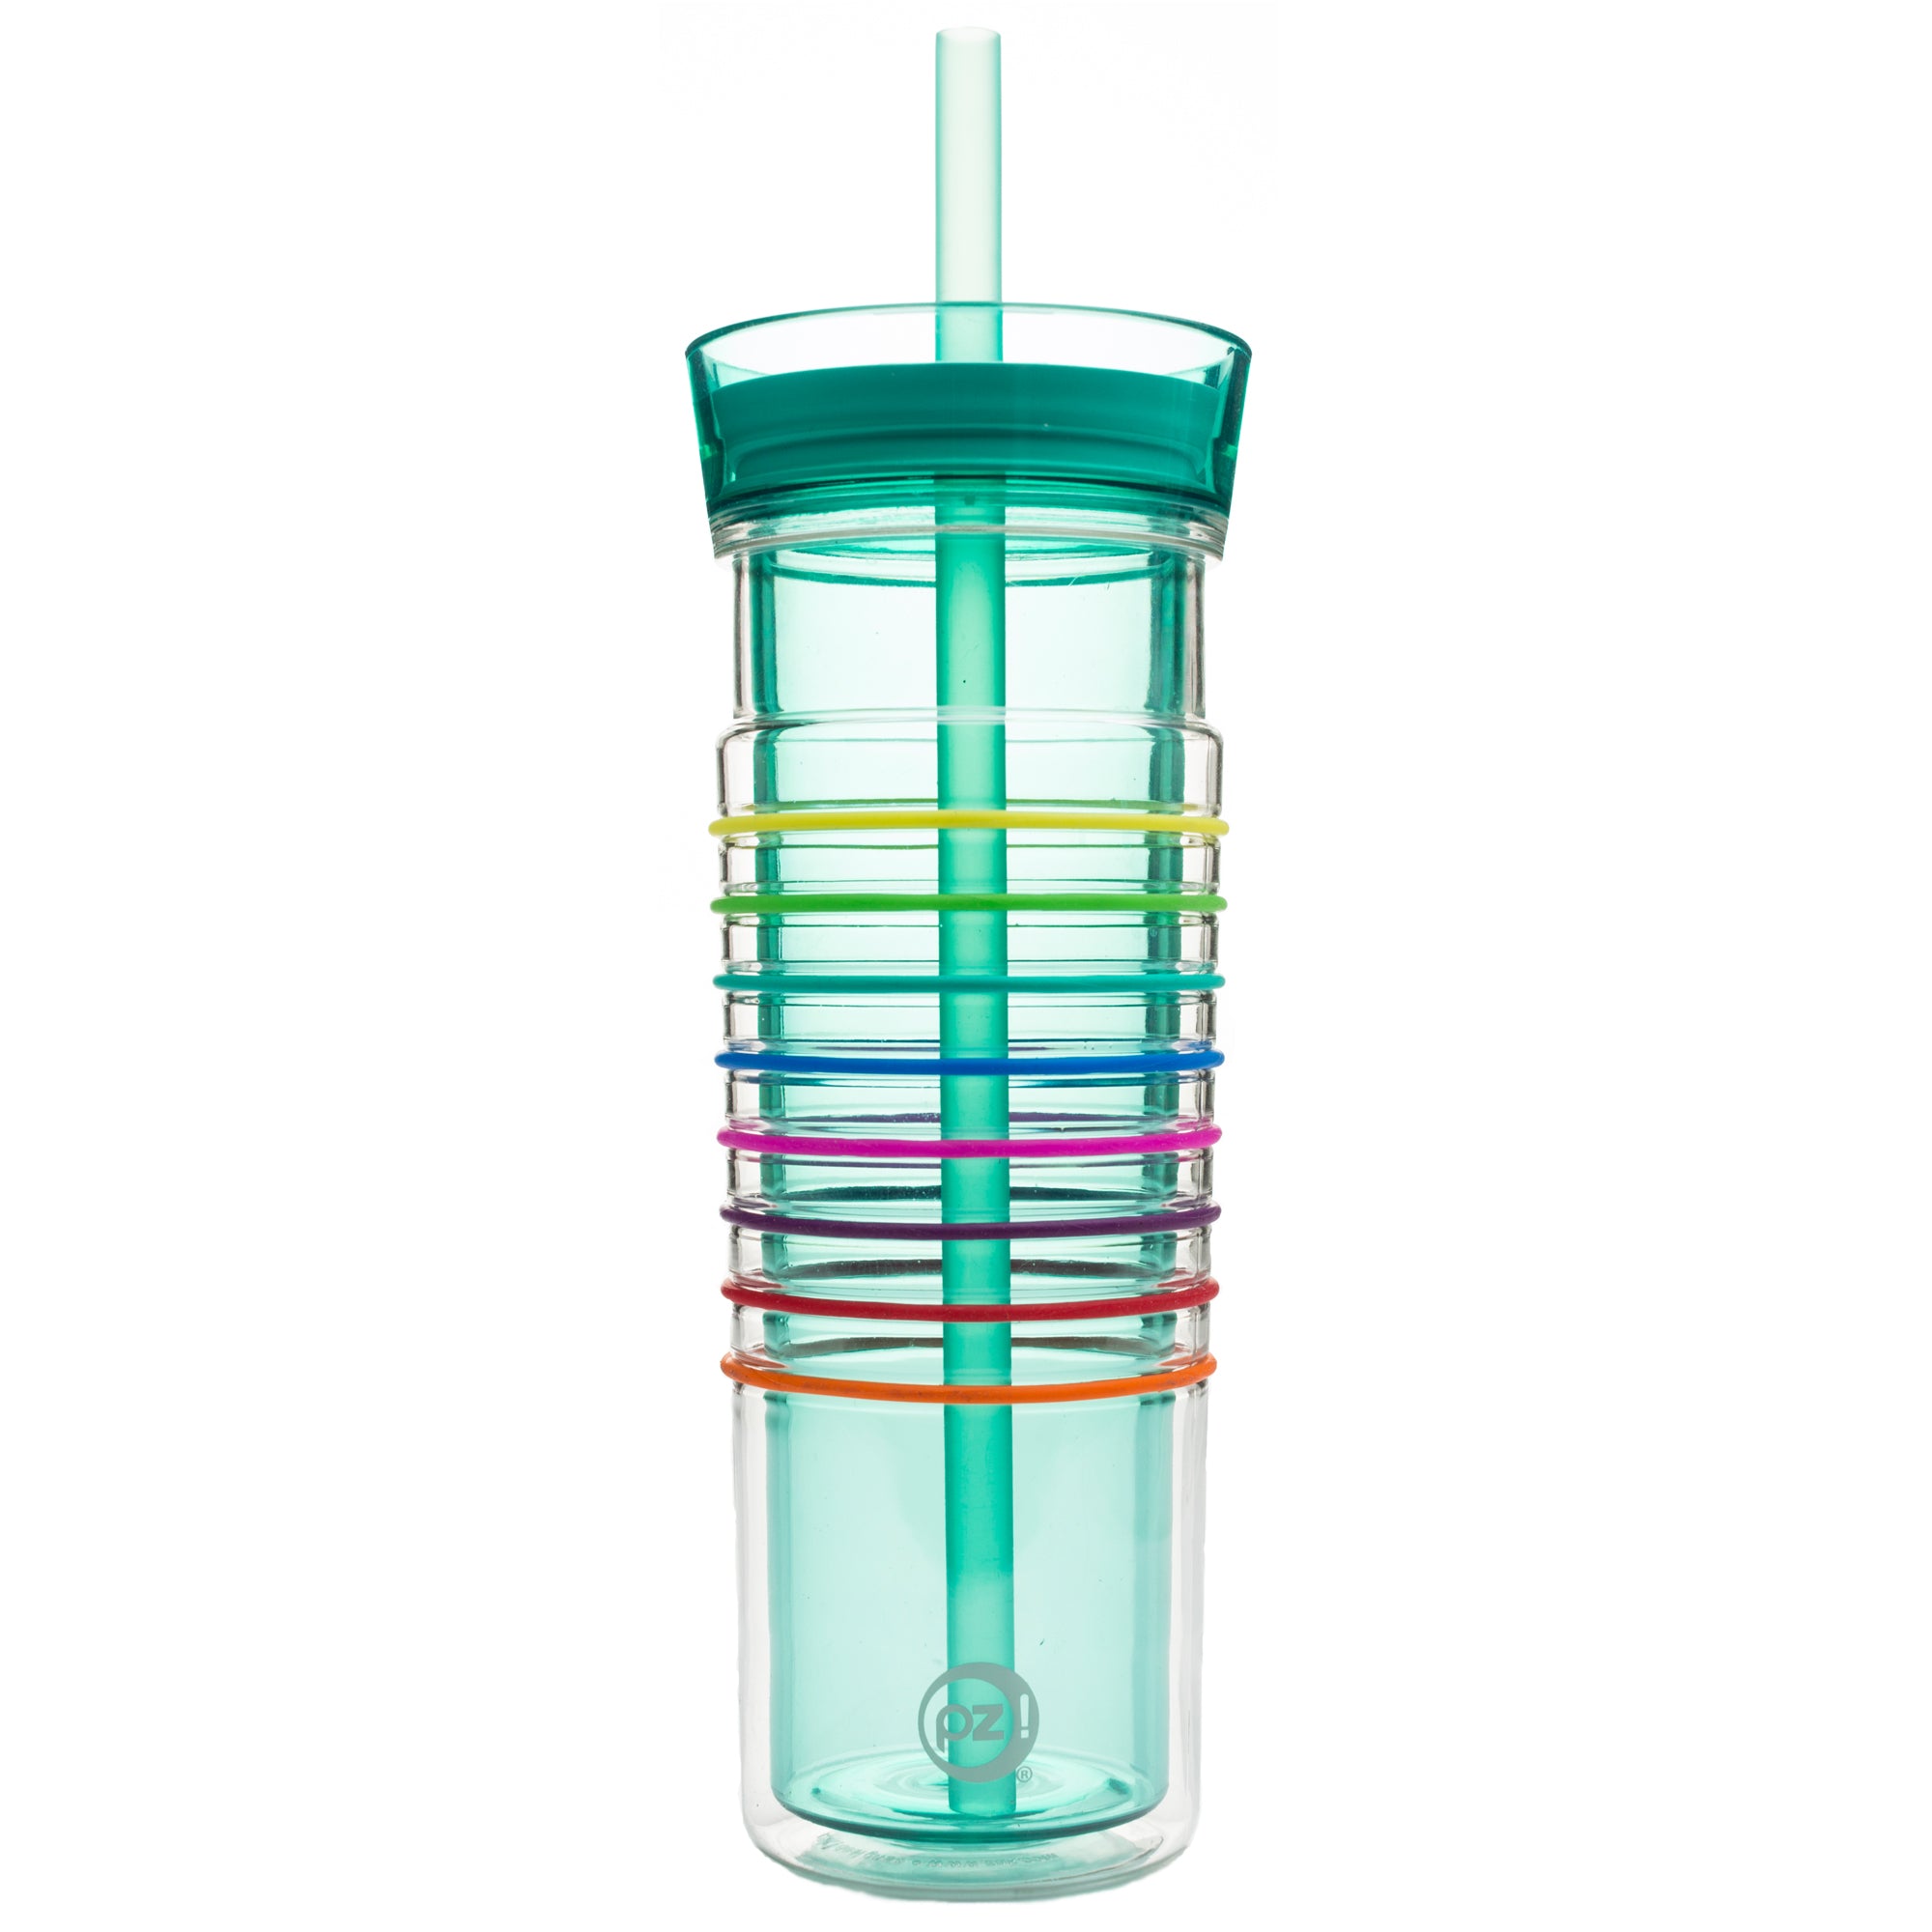 HydraTrak Insulated Tumbler with Silicone Tracker Bands and Straw, Seafoam